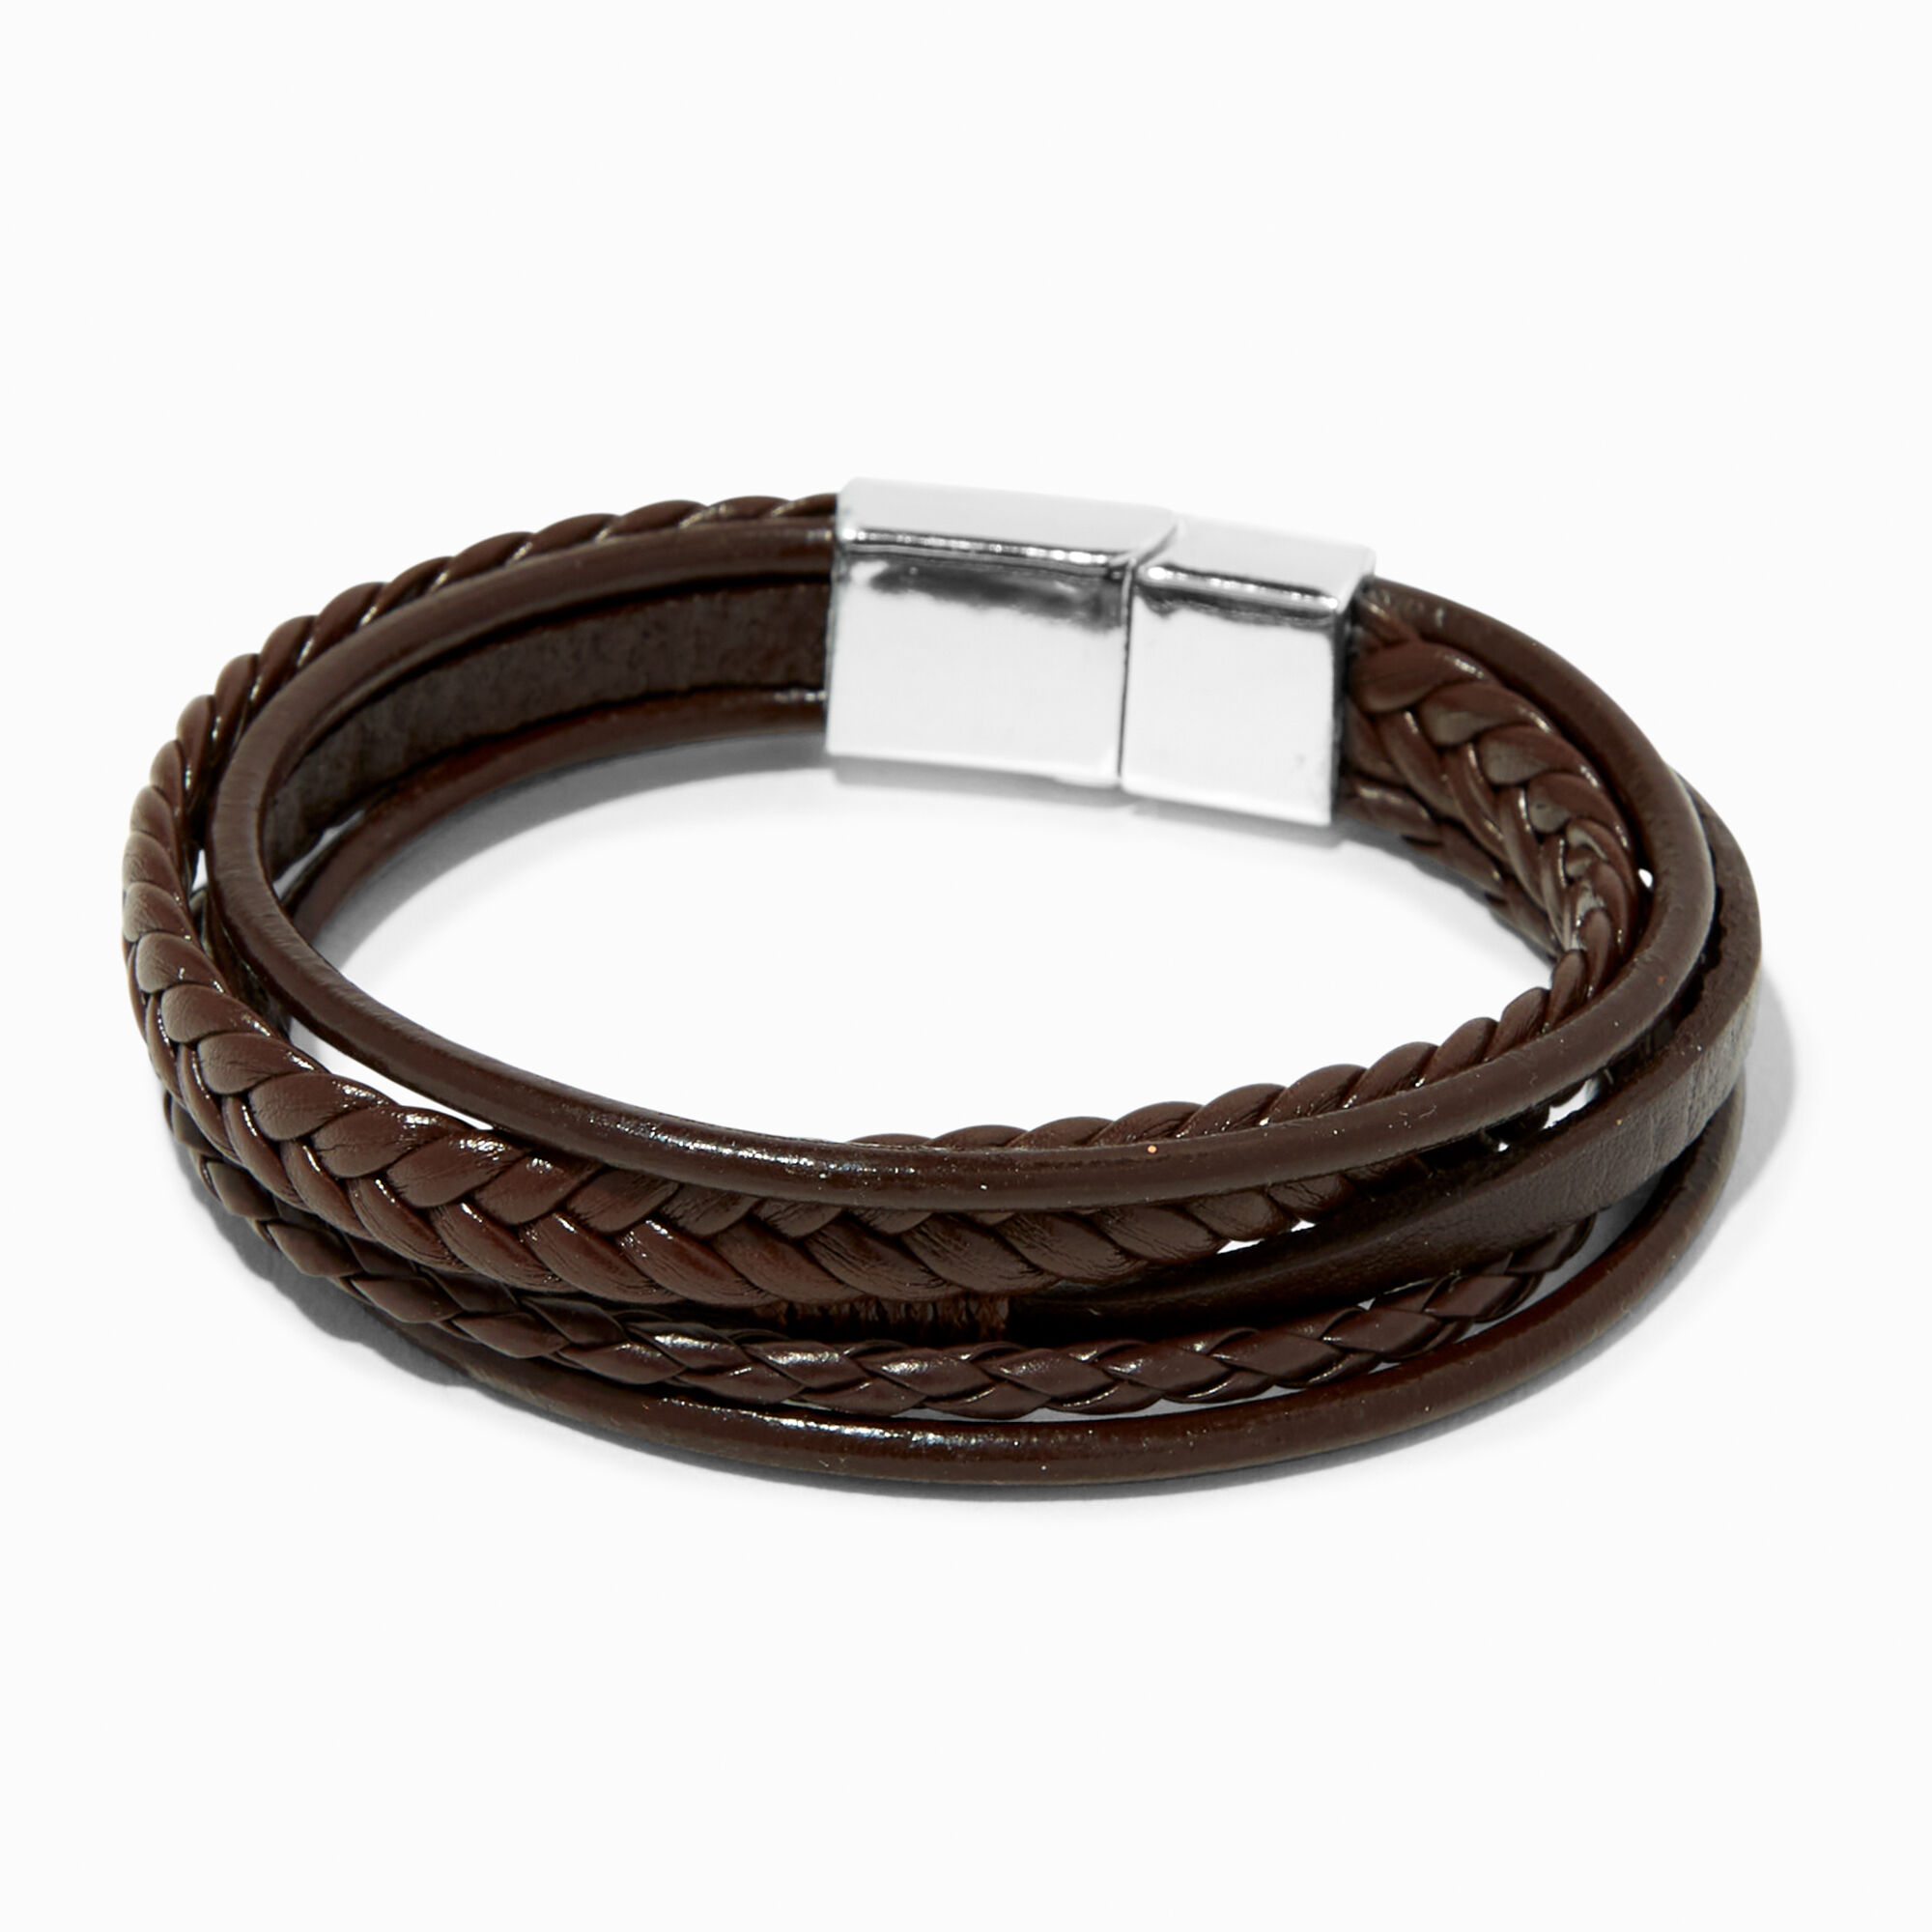 View Claires Leather Look Braided Wrap Bracelet Brown information